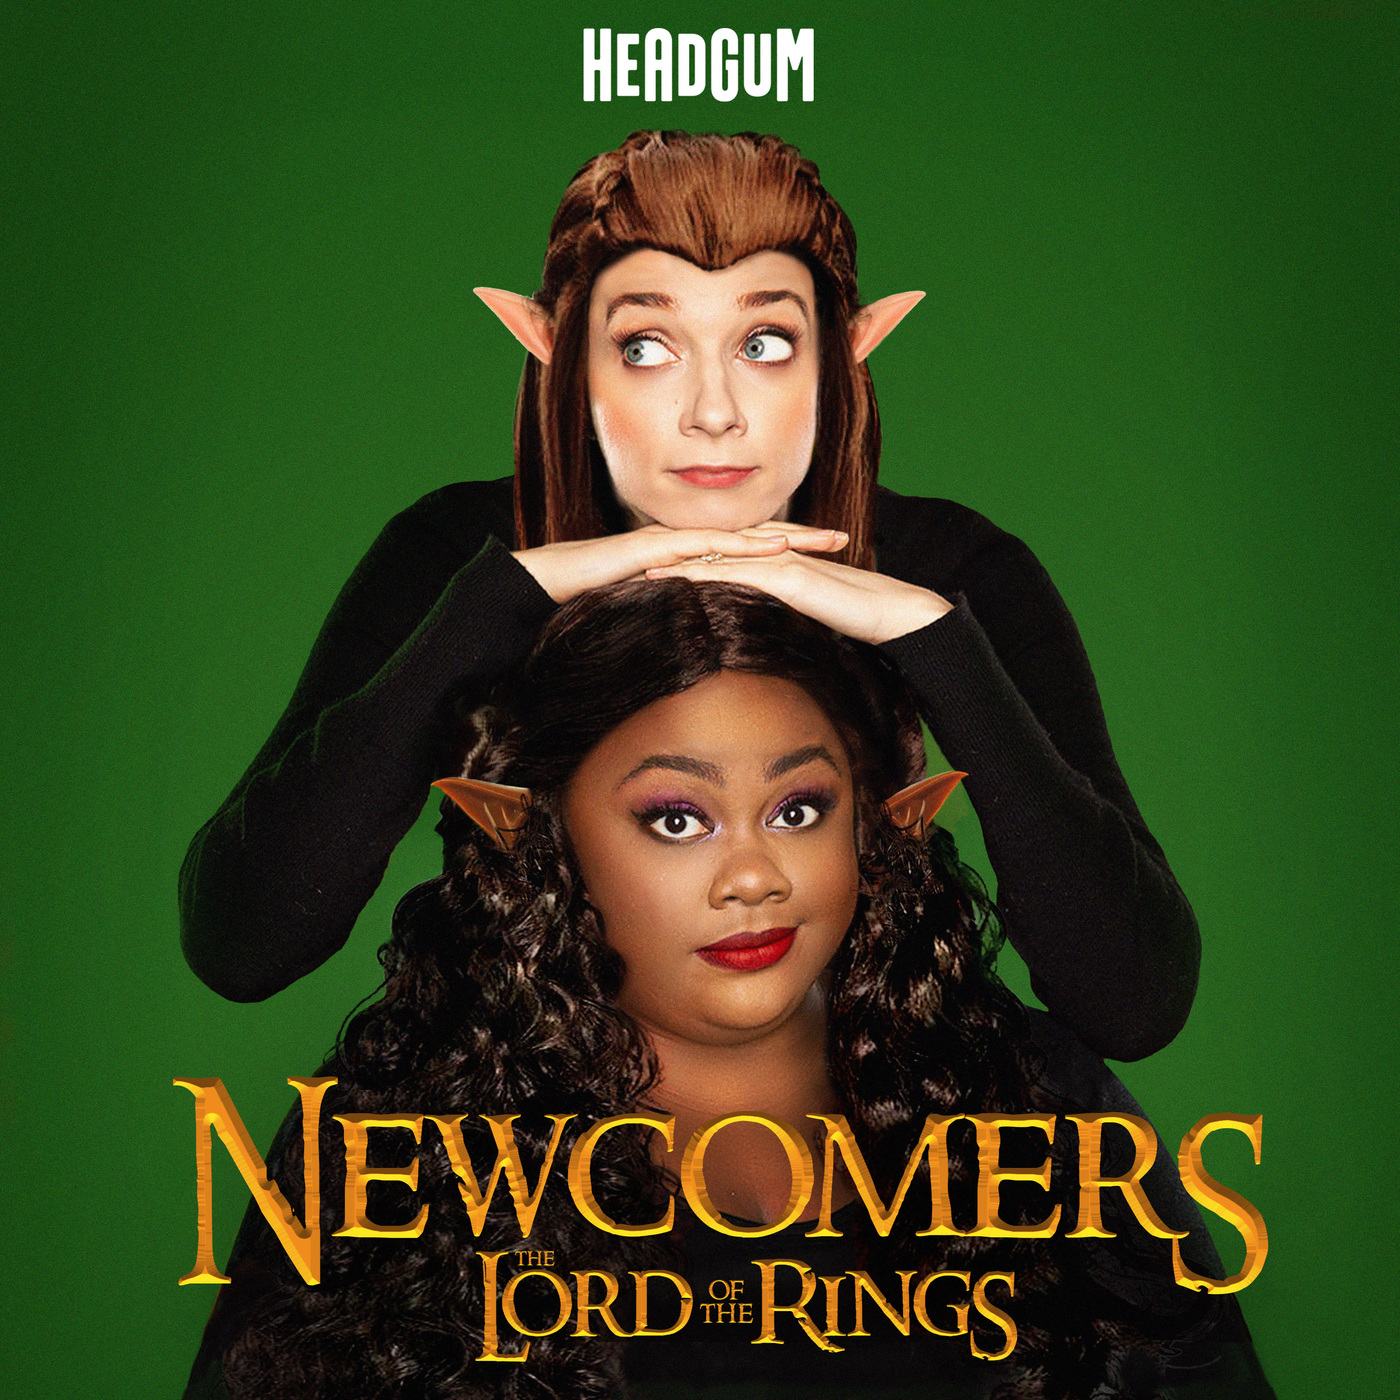 Newcomers: The Lord of the Rings, with Lauren Lapkus and Nicole Byer |  Listen via Stitcher for Podcasts